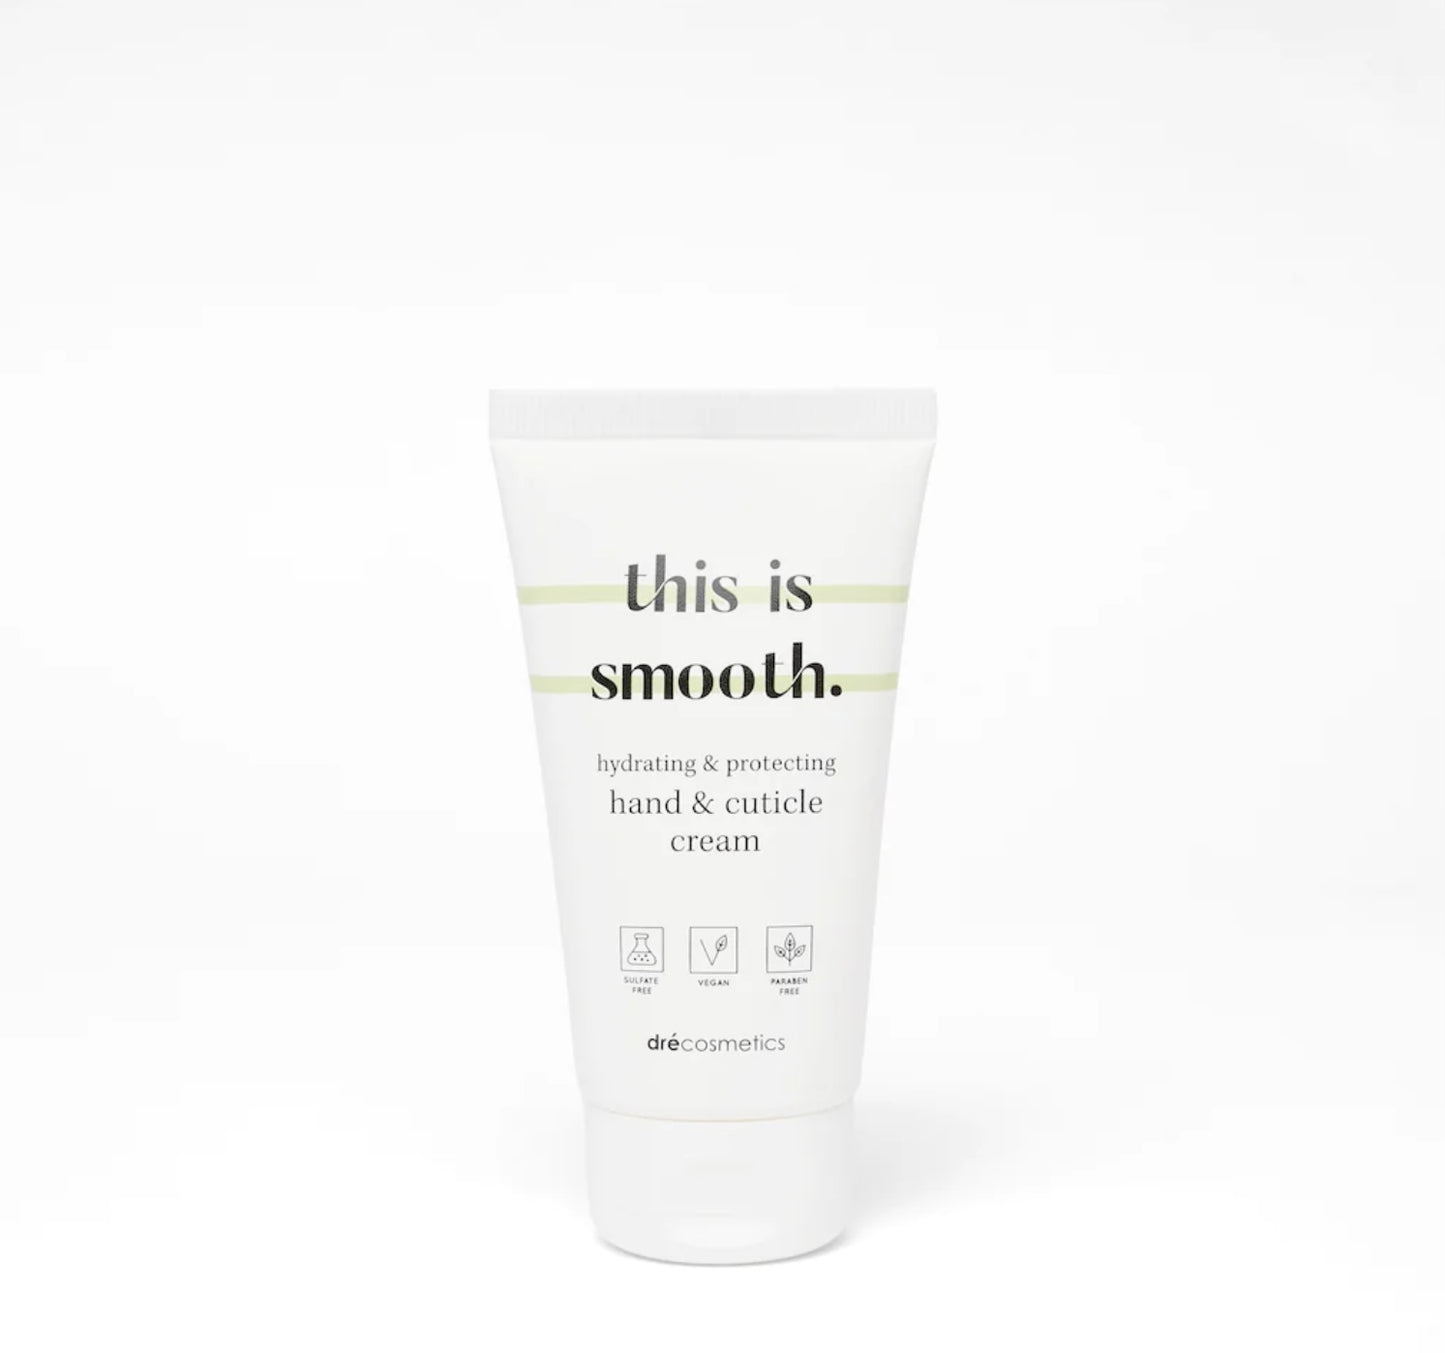 Hand & Cuticle Cream "this is smooth."